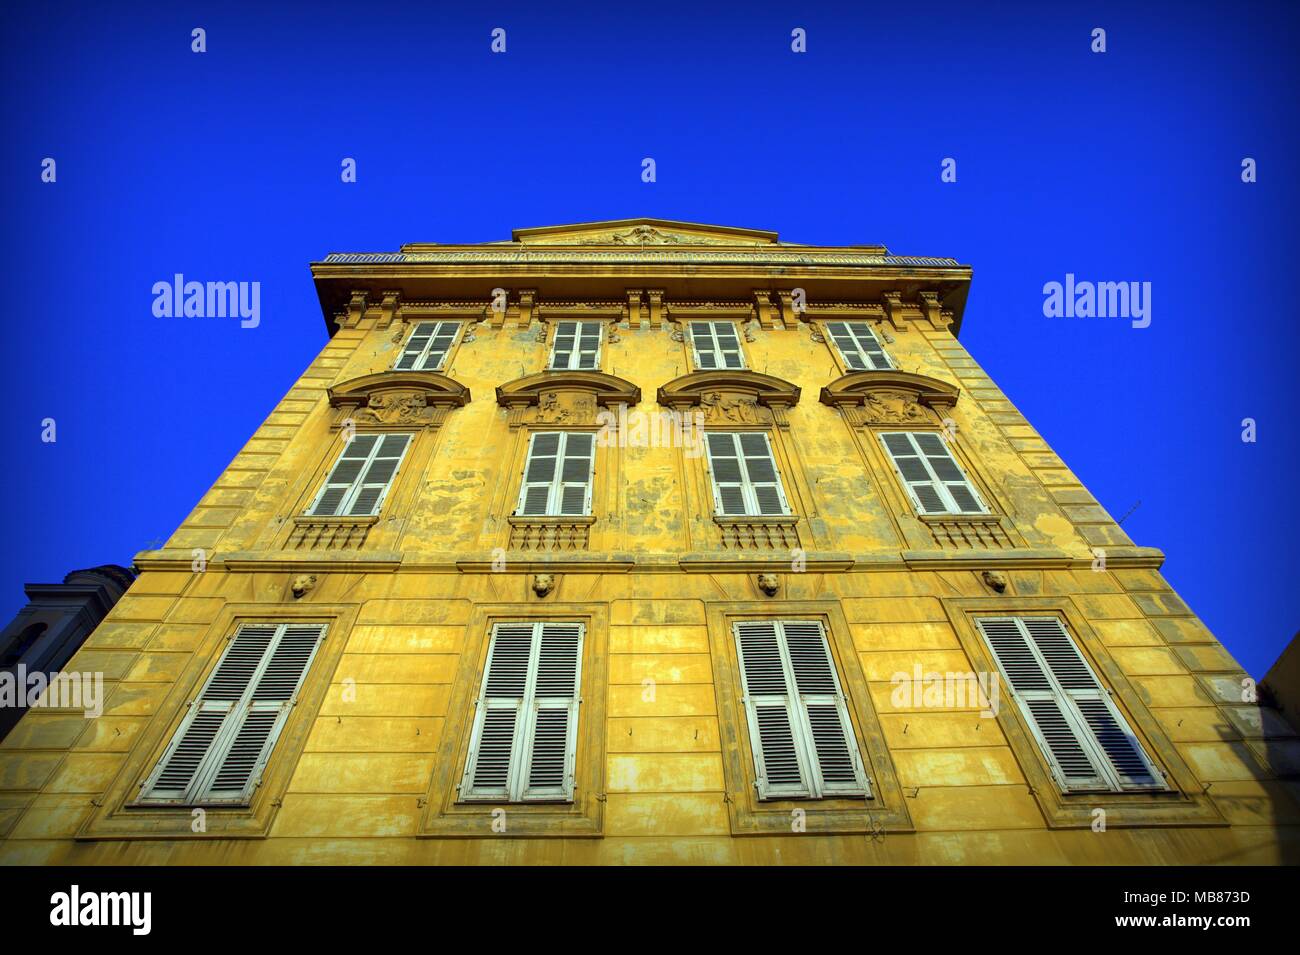 Yellow building on blue sky background Stock Photo